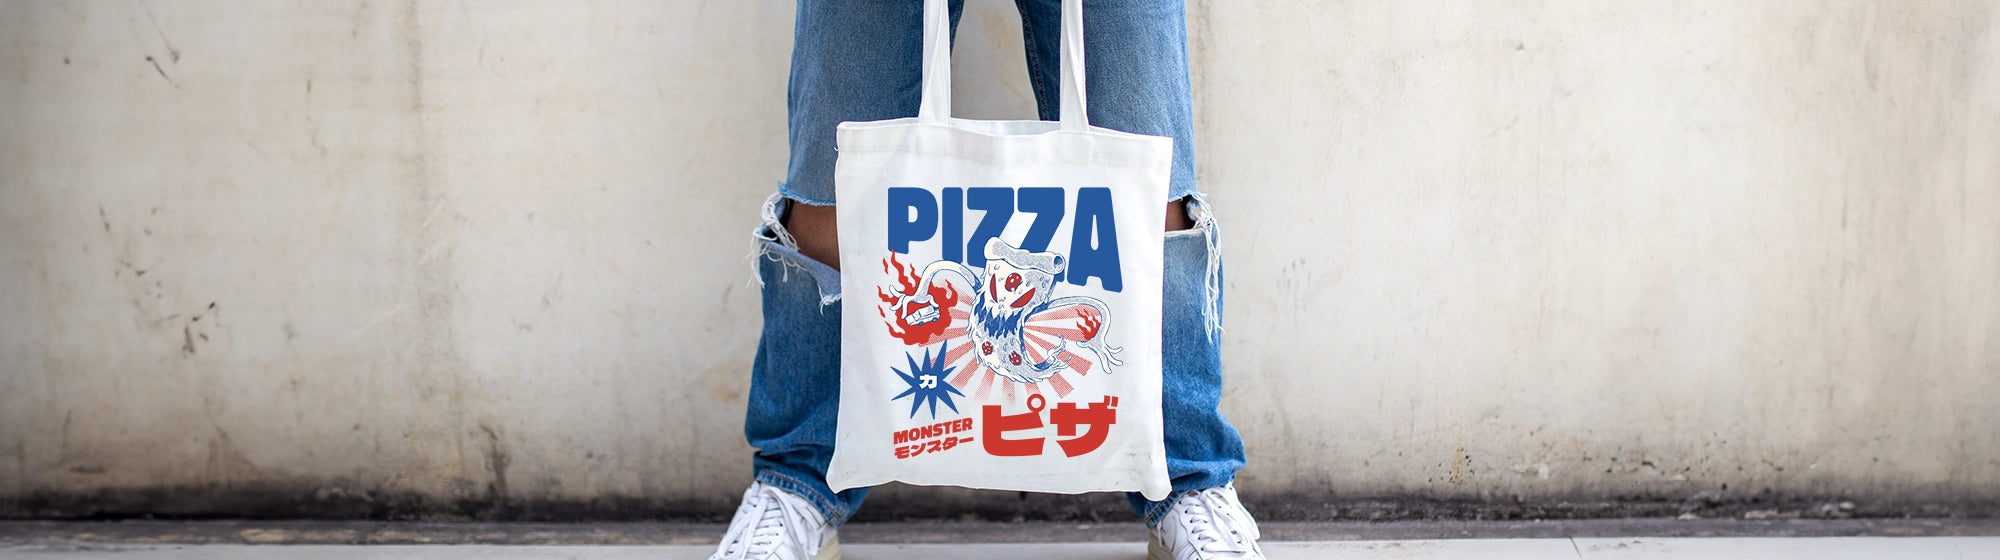 Person holding custom tote bag with printed design of a japanese pizza monster